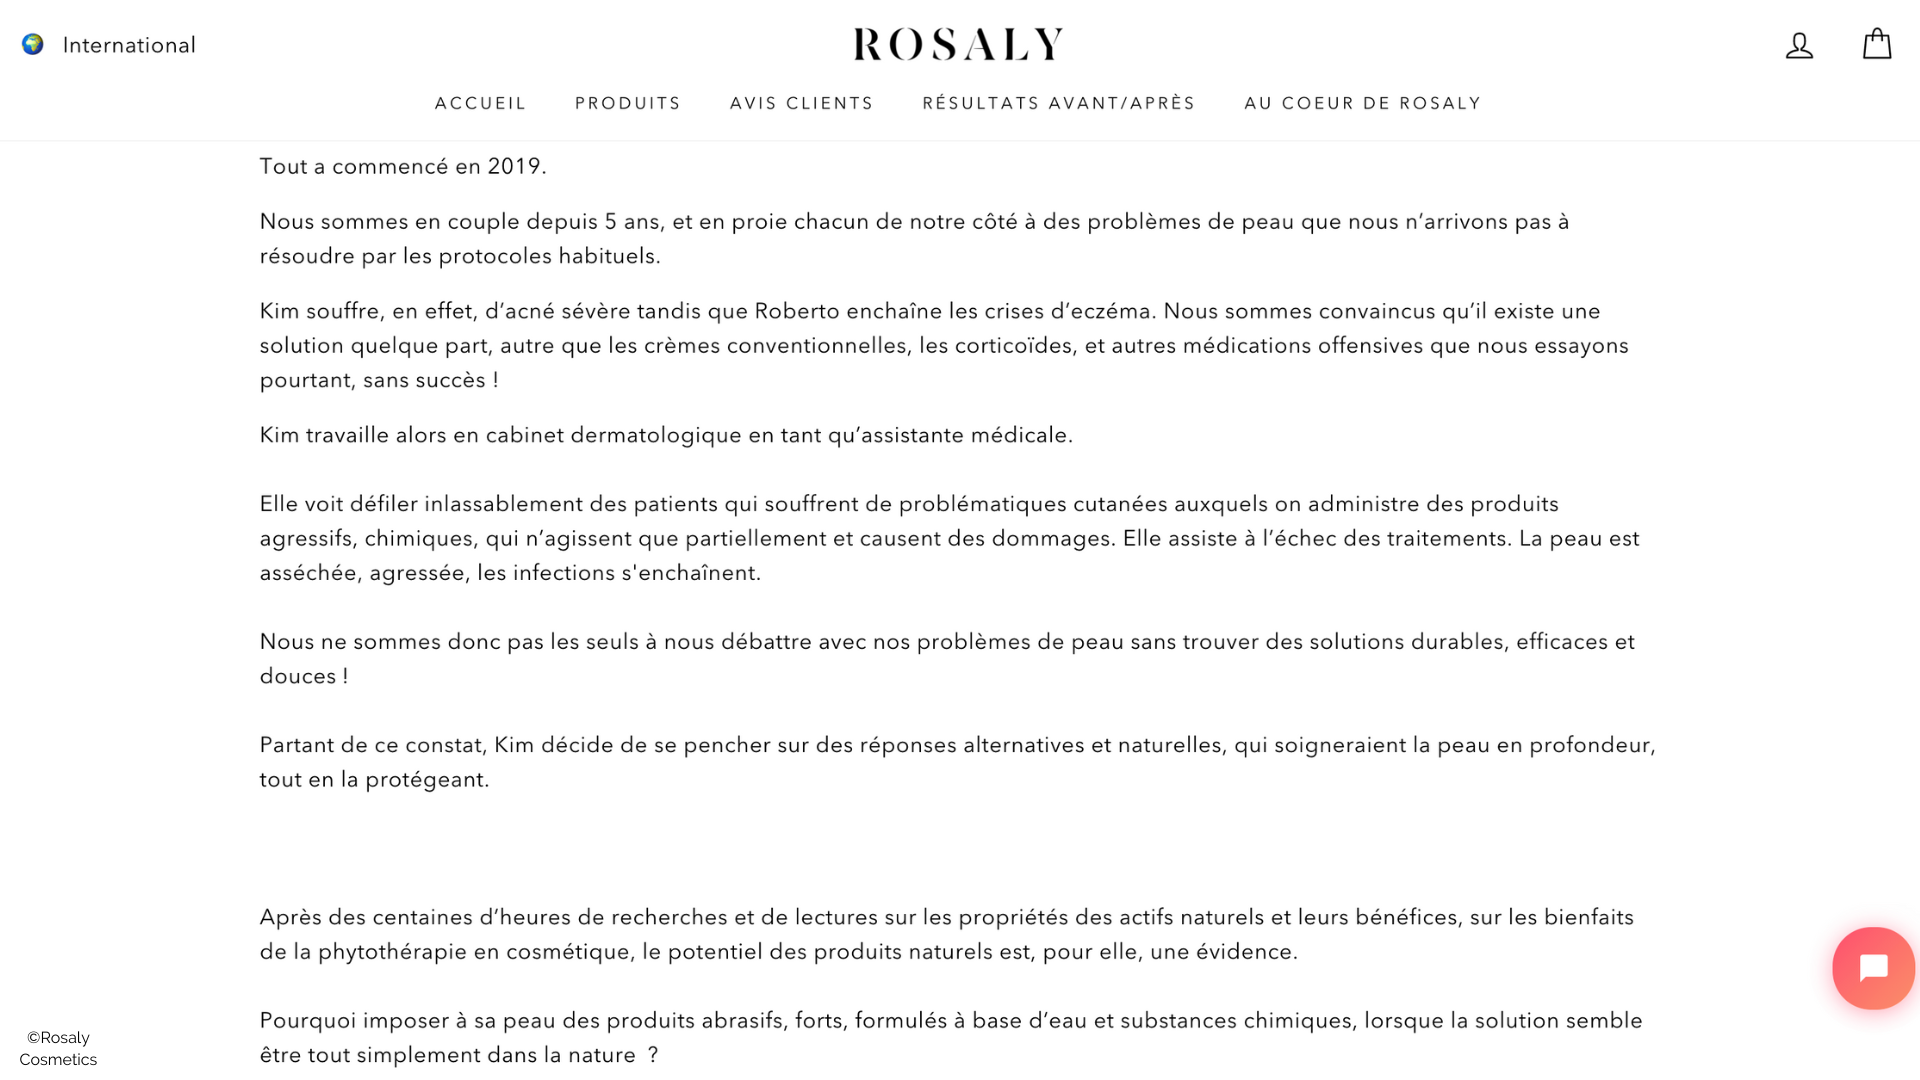 Projet client : Rosaly Cosmetics